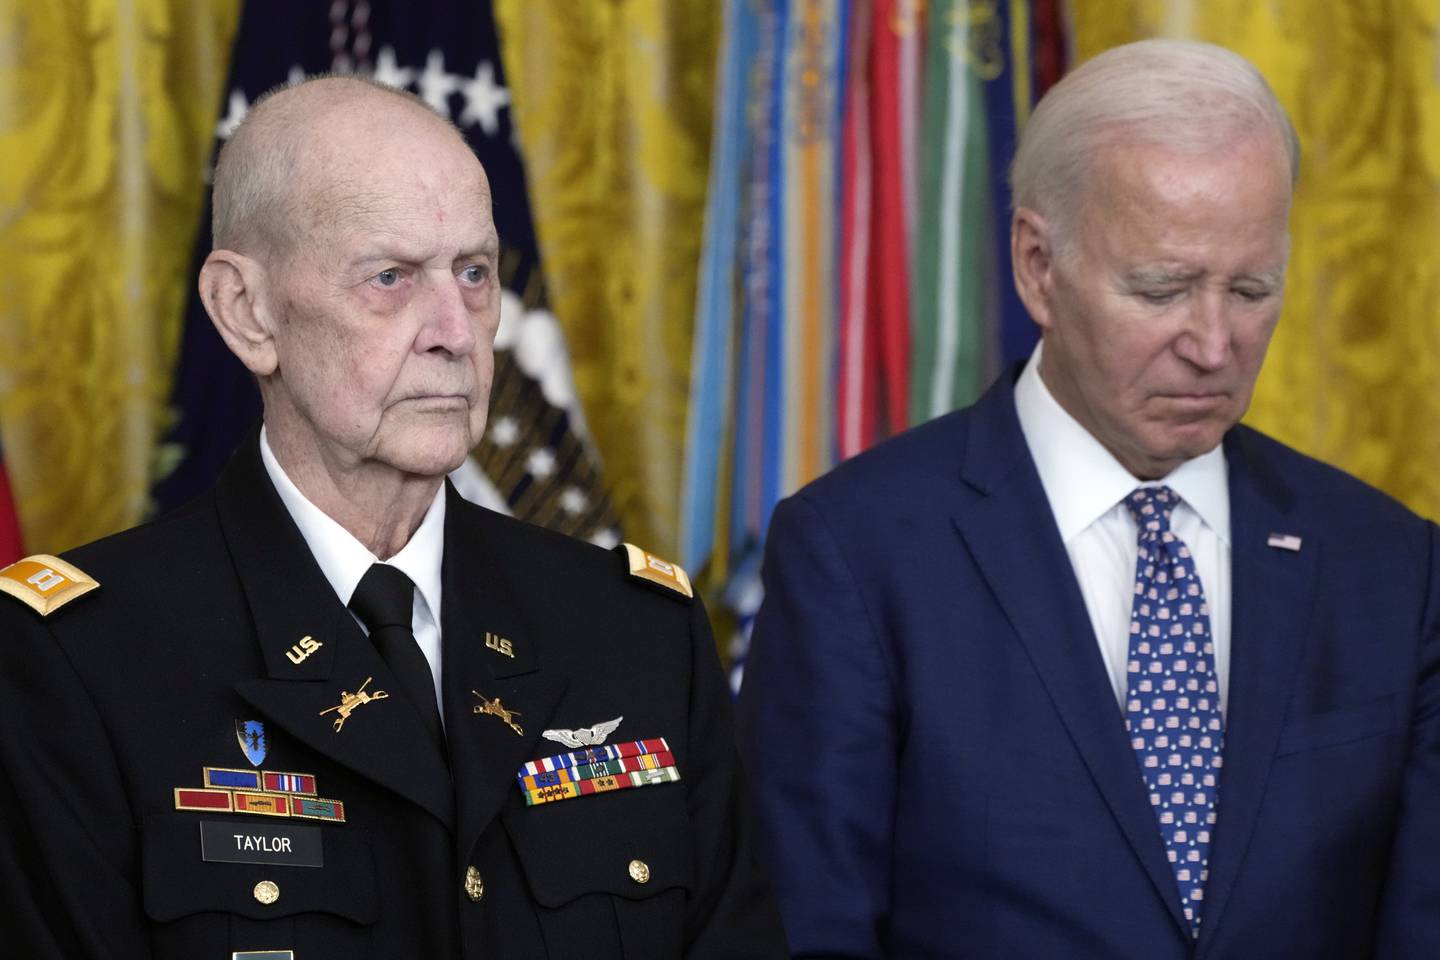 President Joe Biden listens to the citation being read before he awards the Medal of Honor to Capt. Larry Taylor, an Army pilot from the Vietnam War who risked his life to rescue a reconnaissance team that was about to be overrun by the enemy, during a ceremony Tuesday, Sept. 5, 2023, in the East Room of the White House in Washington.